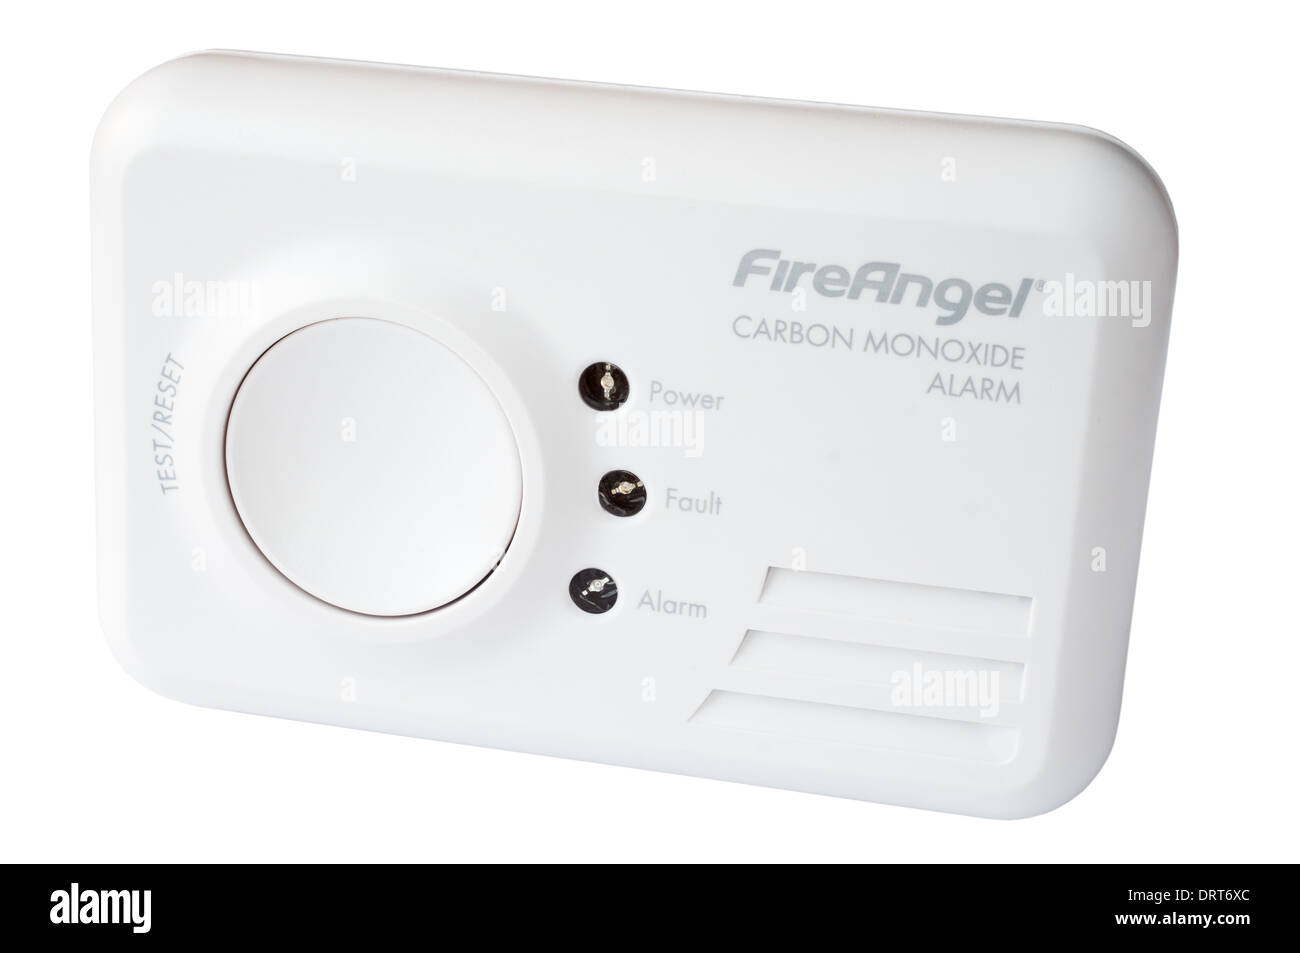 Fireangel carbon monoxide detector and alarm isolated on a white background Stock Photo